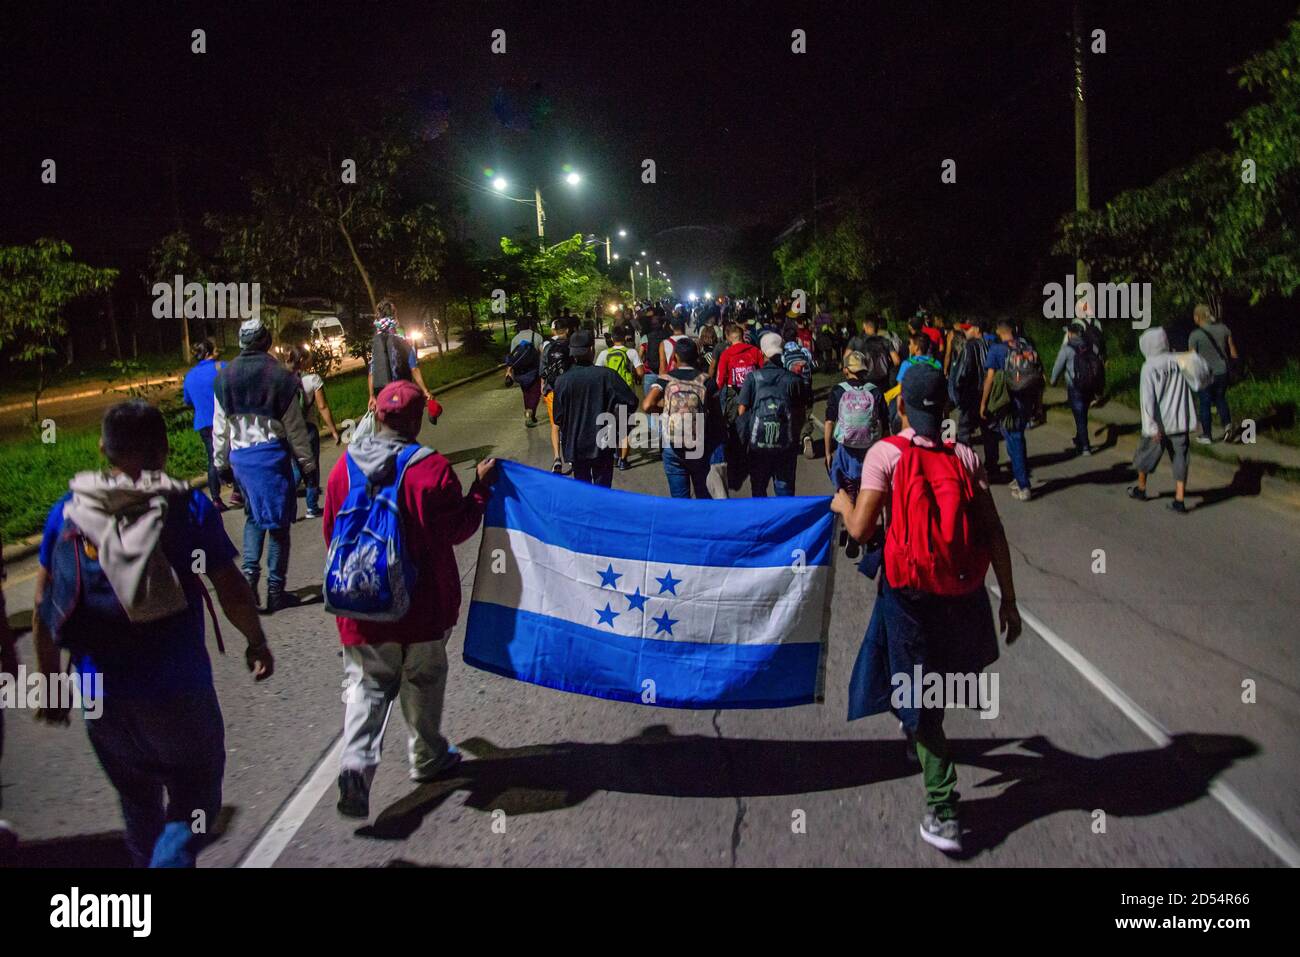 San Pedro Sula, Honduras. 15th Jan, 2020. Migrants march with a Honduran flag walking towards the Guatemalan border at 4am on the first day of their journey to the U.S. border. Migrants are fleeing from extreme poverty and gang violence, hoping to find a better life in the U.S. They must travel over 3,000 miles through Guatemala and Mexico, often times with nothing but the clothes on their back, to reach the border in Tijuana, Mexico where their fate is undecided. Credit: Seth Sidney Berry/SOPA Images/ZUMA Wire/Alamy Live News Stock Photo